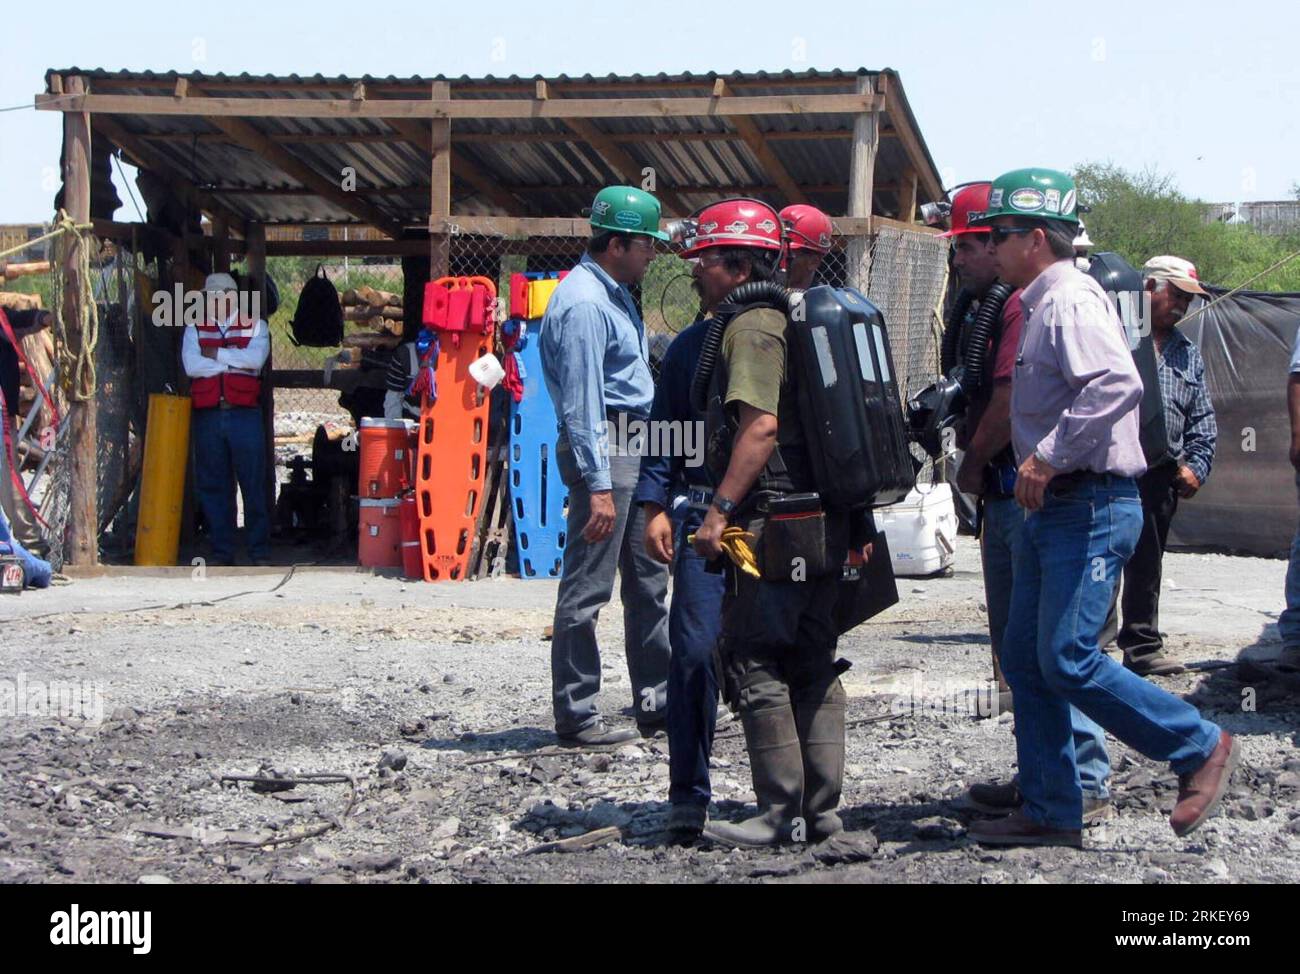 Bildnummer: 55314767  Datum: 04.05.2011  Copyright: imago/Xinhua (110504) -- SAN JUAN DE SABINAS, May 4, 2011 (Xinhua) -- Rescue workers prepare to enter a coal mine in the town of San Juan de las Sabinas, Coahuila, northwest Mexico, May 3, 2011. At least 13 Mexican miners were trapped on Tuesday after an explosion in the coal mine caused partial collapse of the structure. (Xinhua/Zocalo Monclova) (MANDATORY CREDIT/NO ARCHIVE/NO SALES/EDITORIAL USE ONLY) MEXICO-SAN JUAN DE SABINAS-MINERS-ACCIDENT PUBLICATIONxNOTxINxCHN Gesellschaft Wirtschaft Mine Unglück Minenunglück kbdig xsk 2011 quer     B Stock Photo